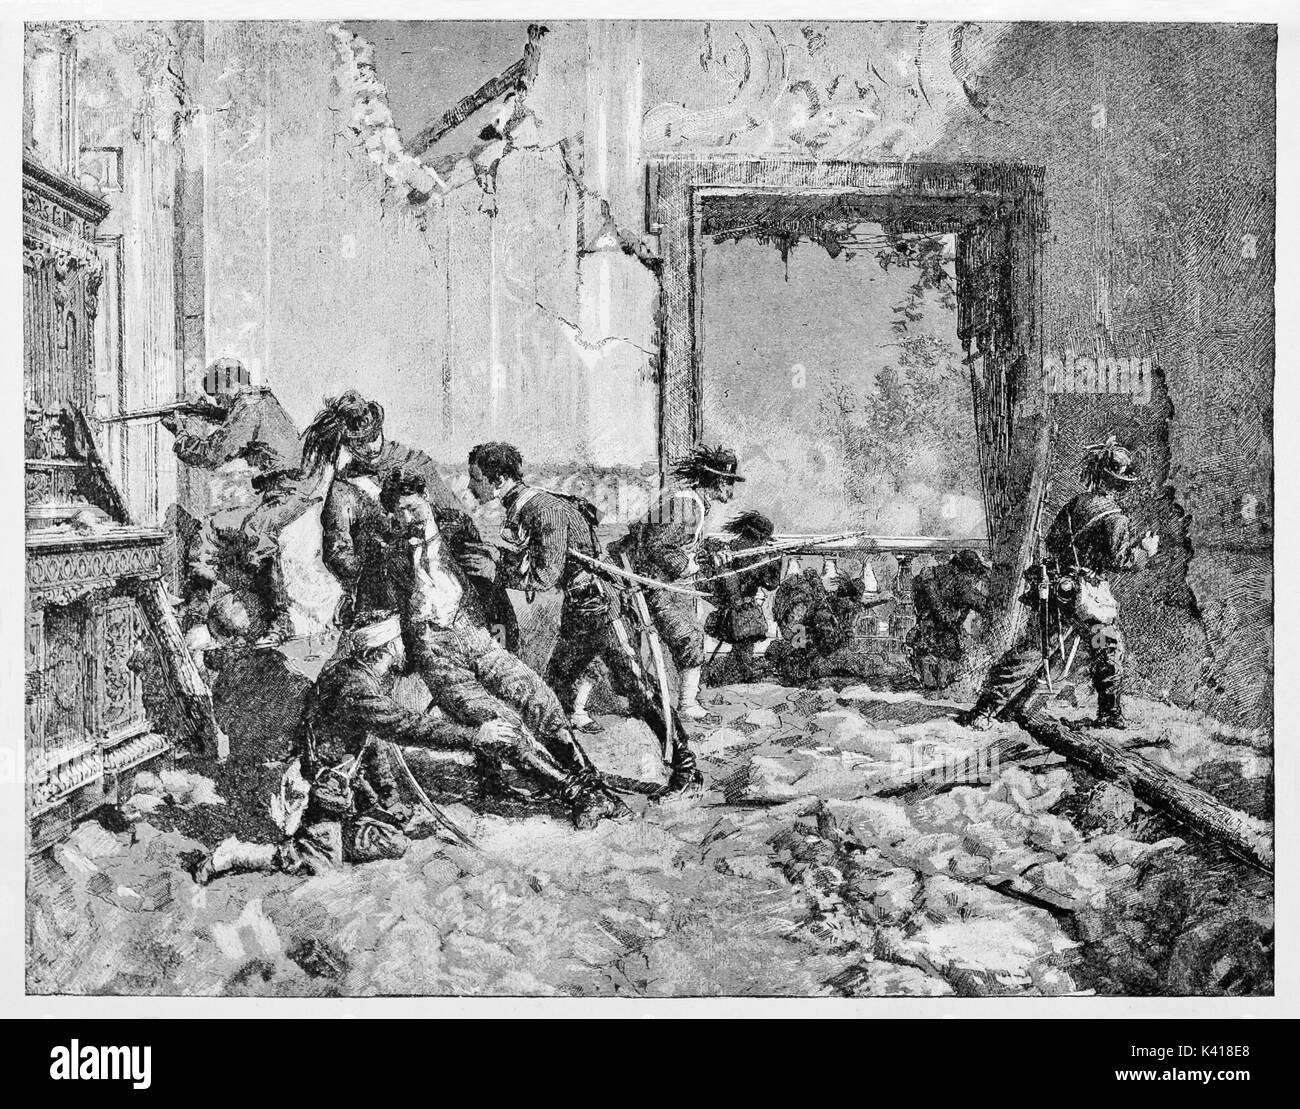 Man mortally wounded during an ancient fight in a ruined room. Italian patriot Luciano Manara supported by allies soldiers in Rome 1849. By E. Matania on Garibaldi e i Suoi Tempi Milan Italy 1884 Stock Photo